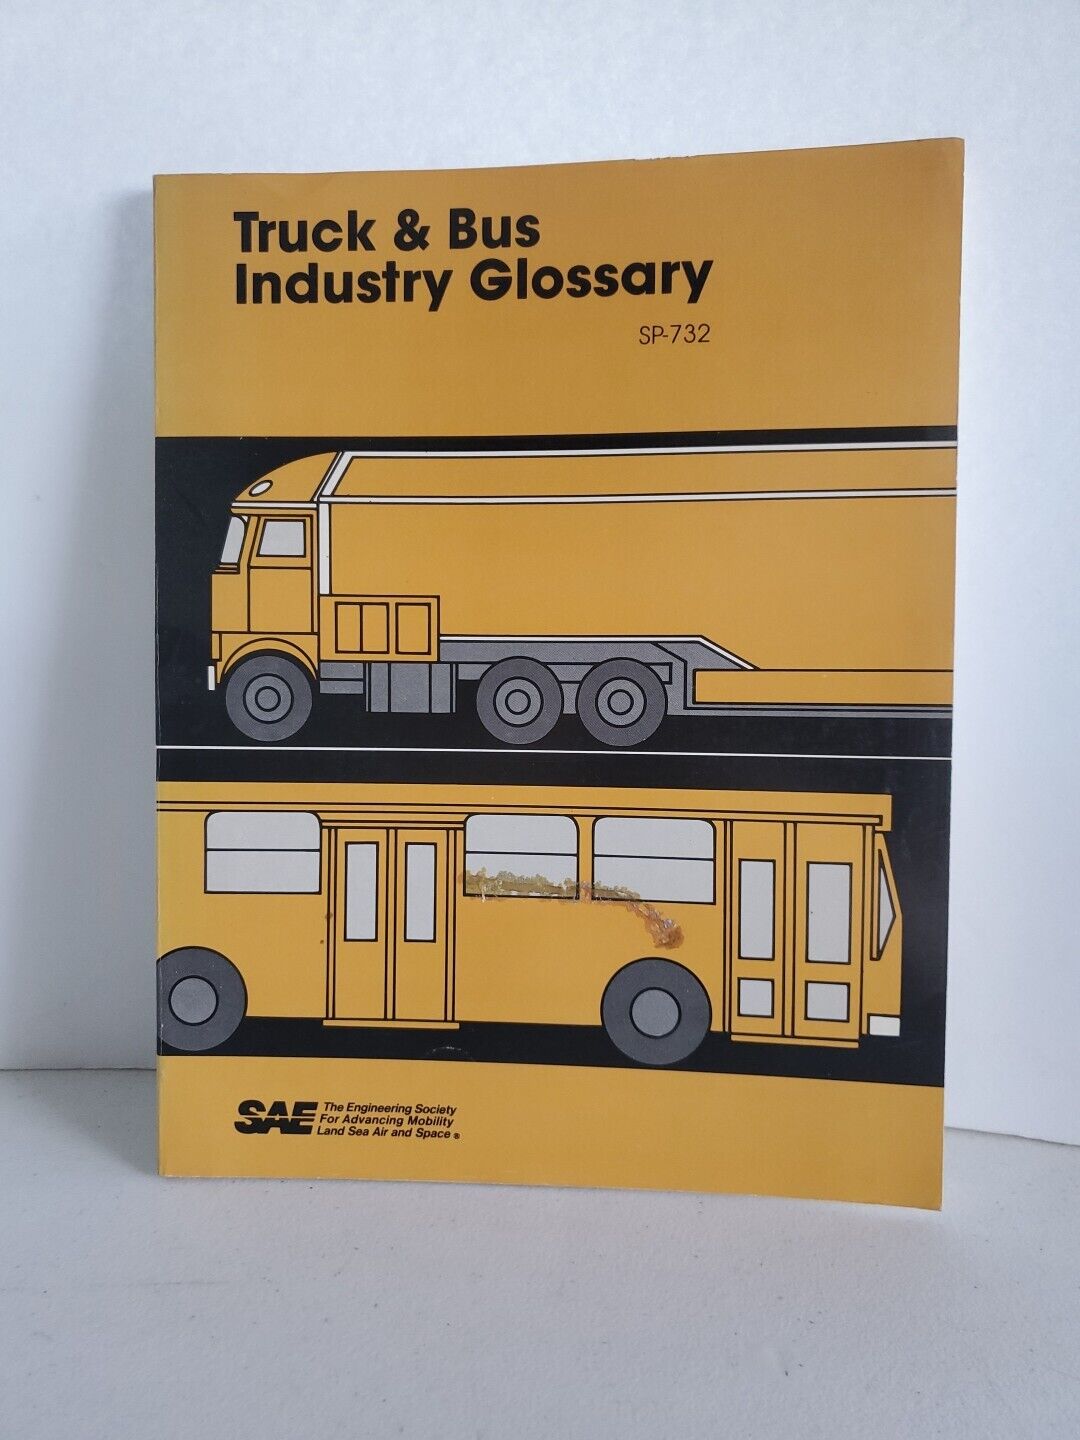 Truck & Bus Industry Glossary SP-732 Book 1988